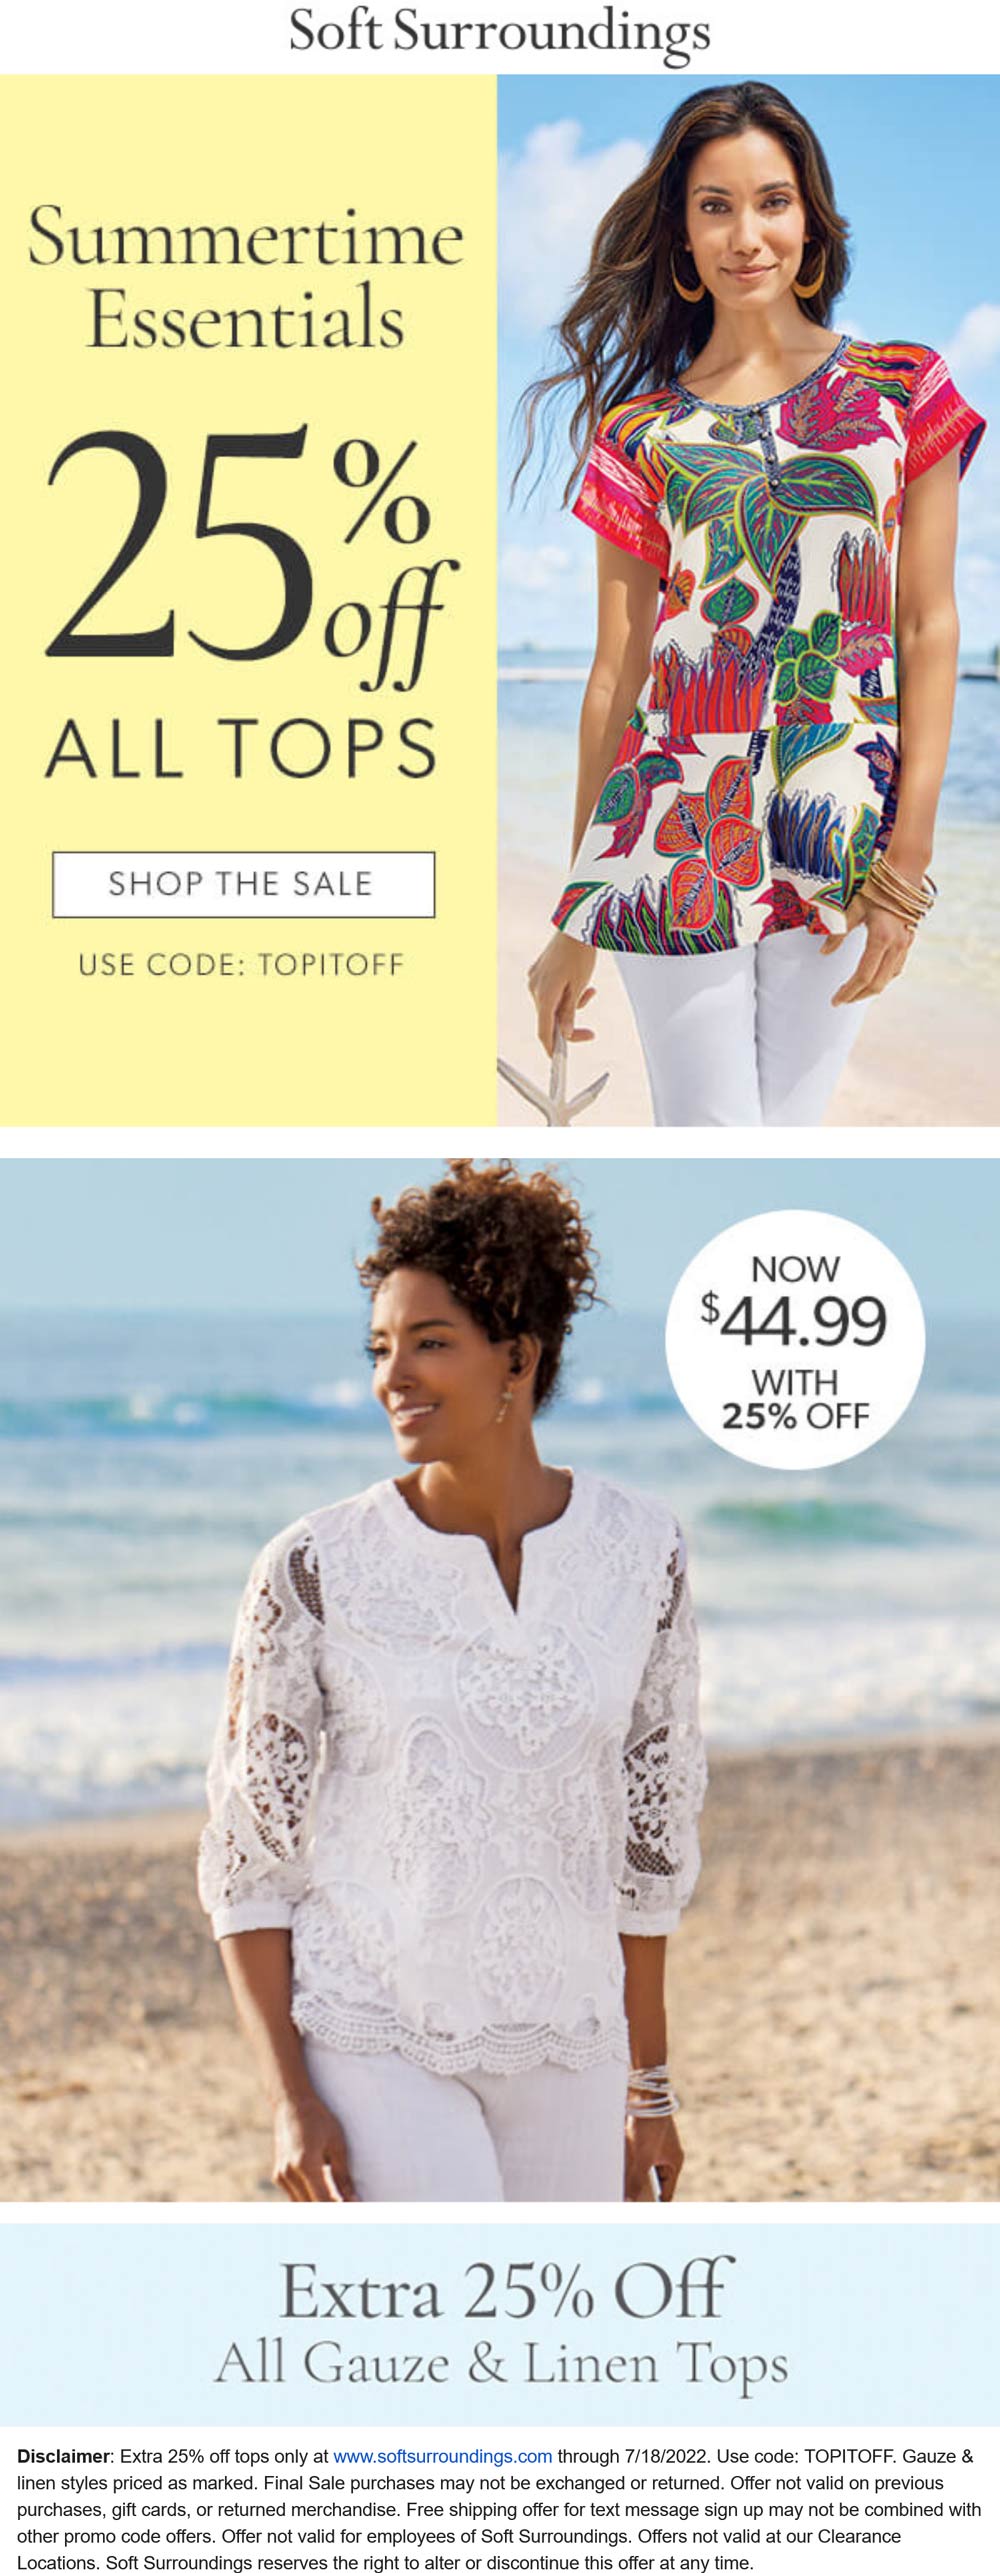 Soft Surroundings stores Coupon  Extra 25% off tops at Soft Surroundings via promo code TOPITOFF #softsurroundings 